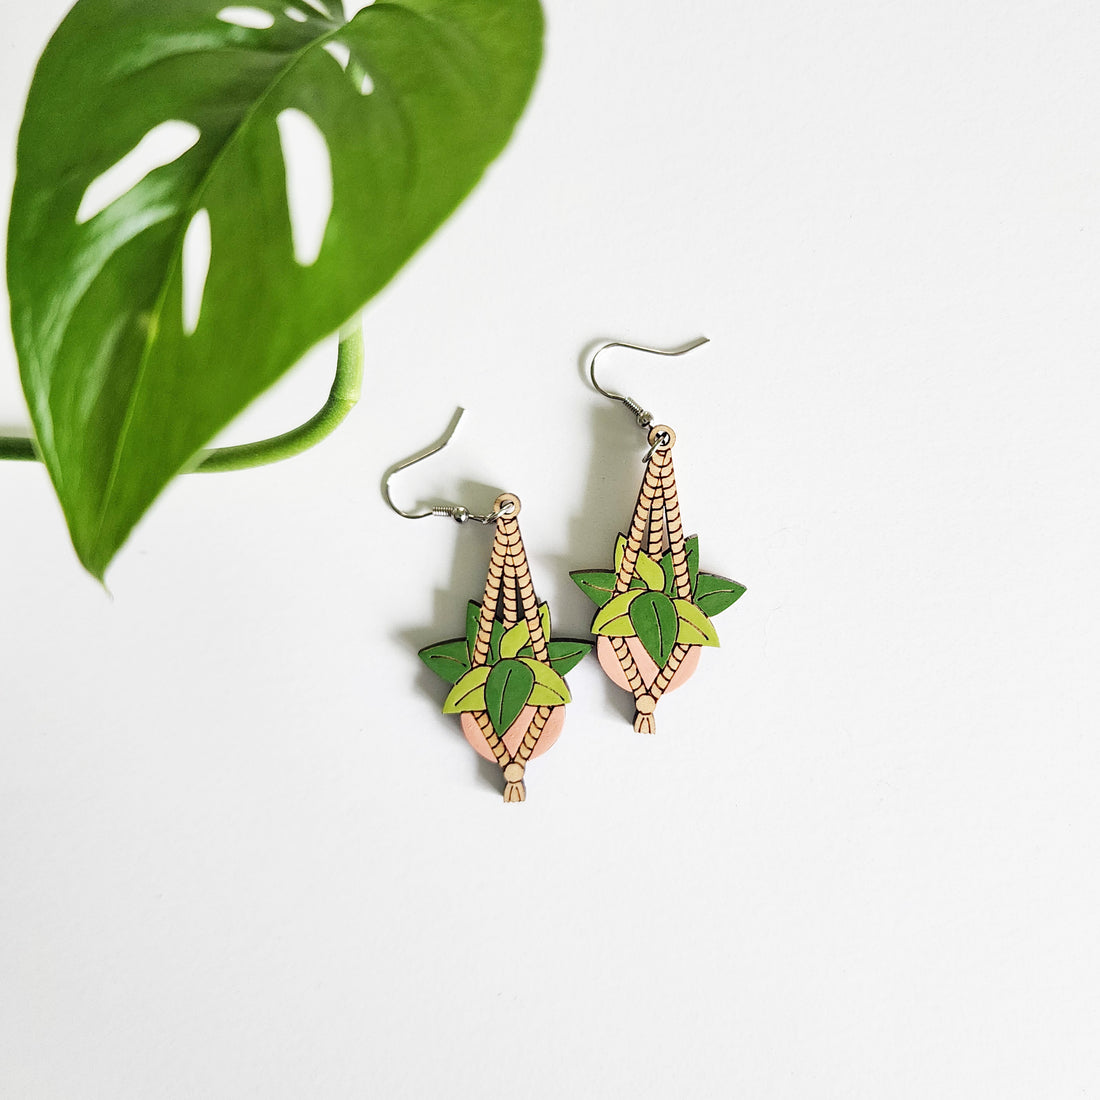 pair of hanging planter earrings on a white background with a leaf